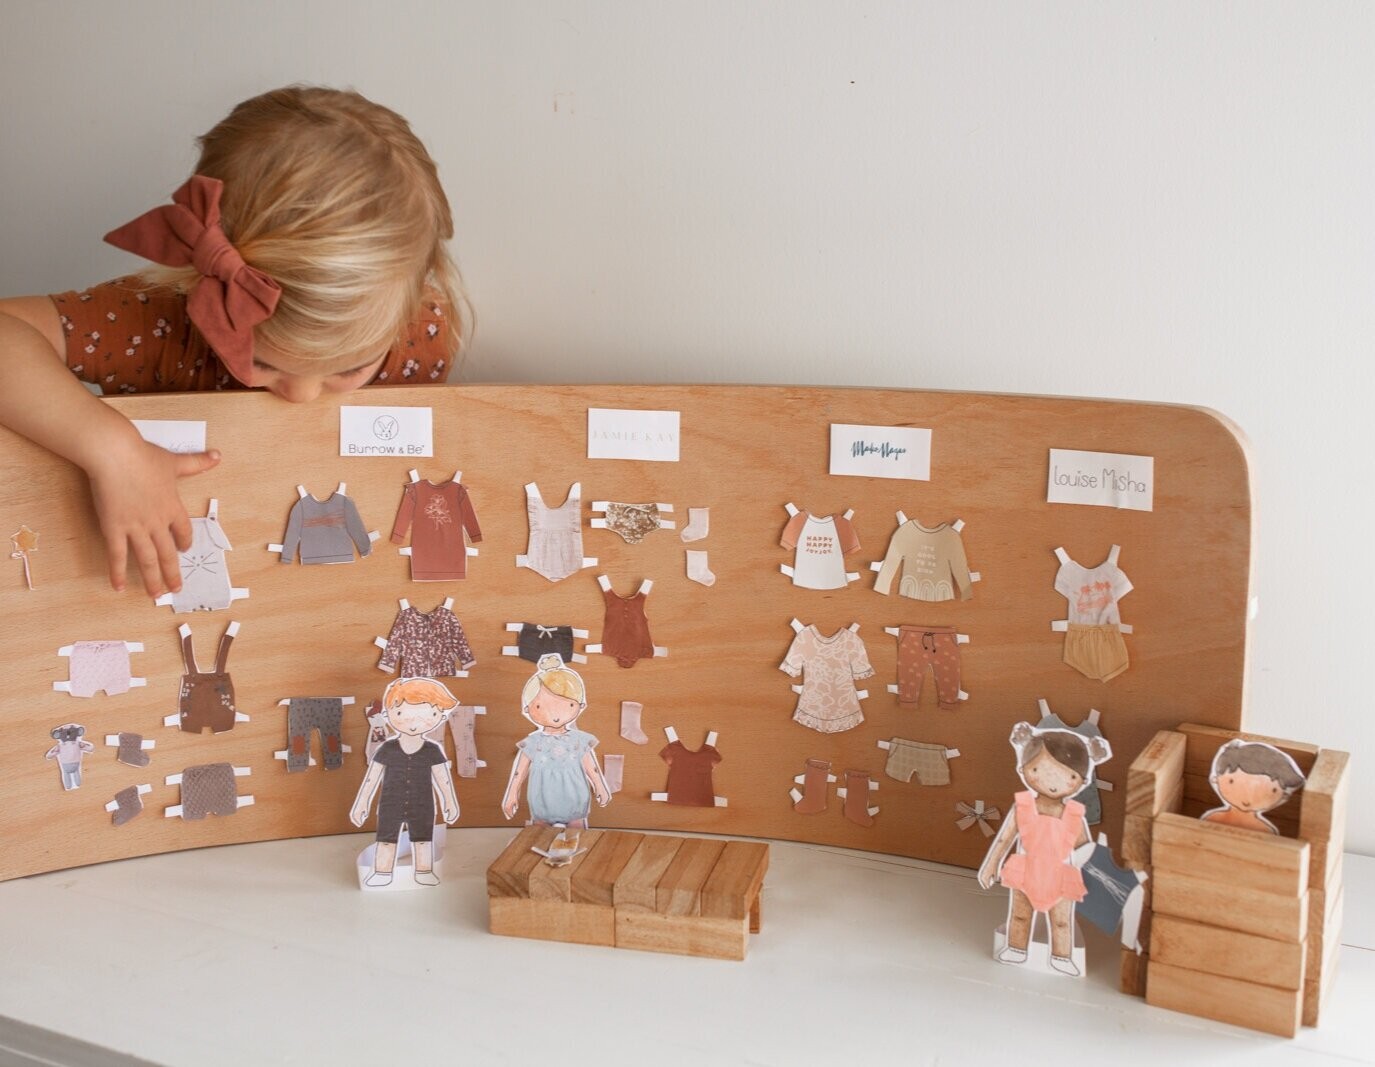 A little girl looks at her dressing station with paper clothes hung up and paper dolls.